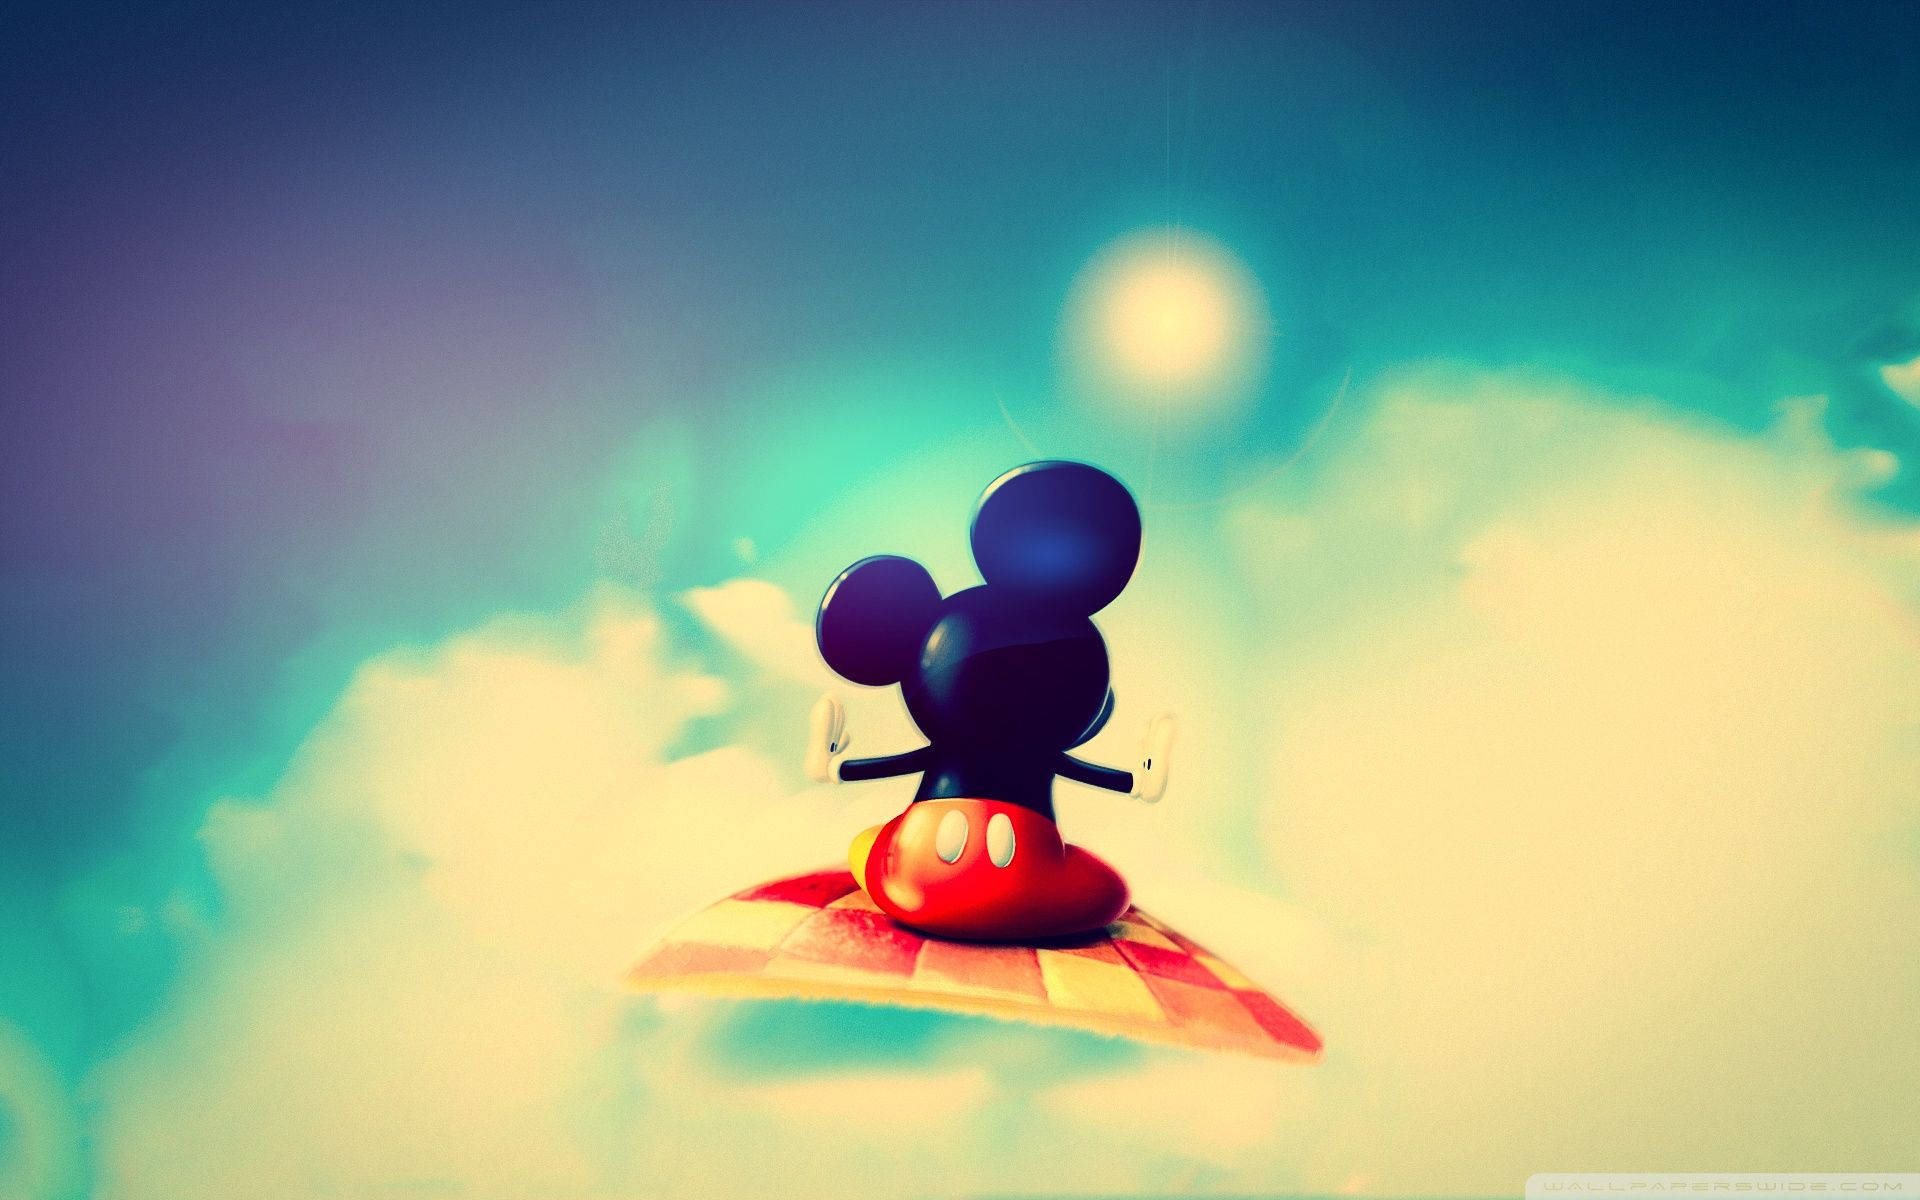 Join Mickey Mouse on a Magical Adventure in a Flying Carpet Wallpaper